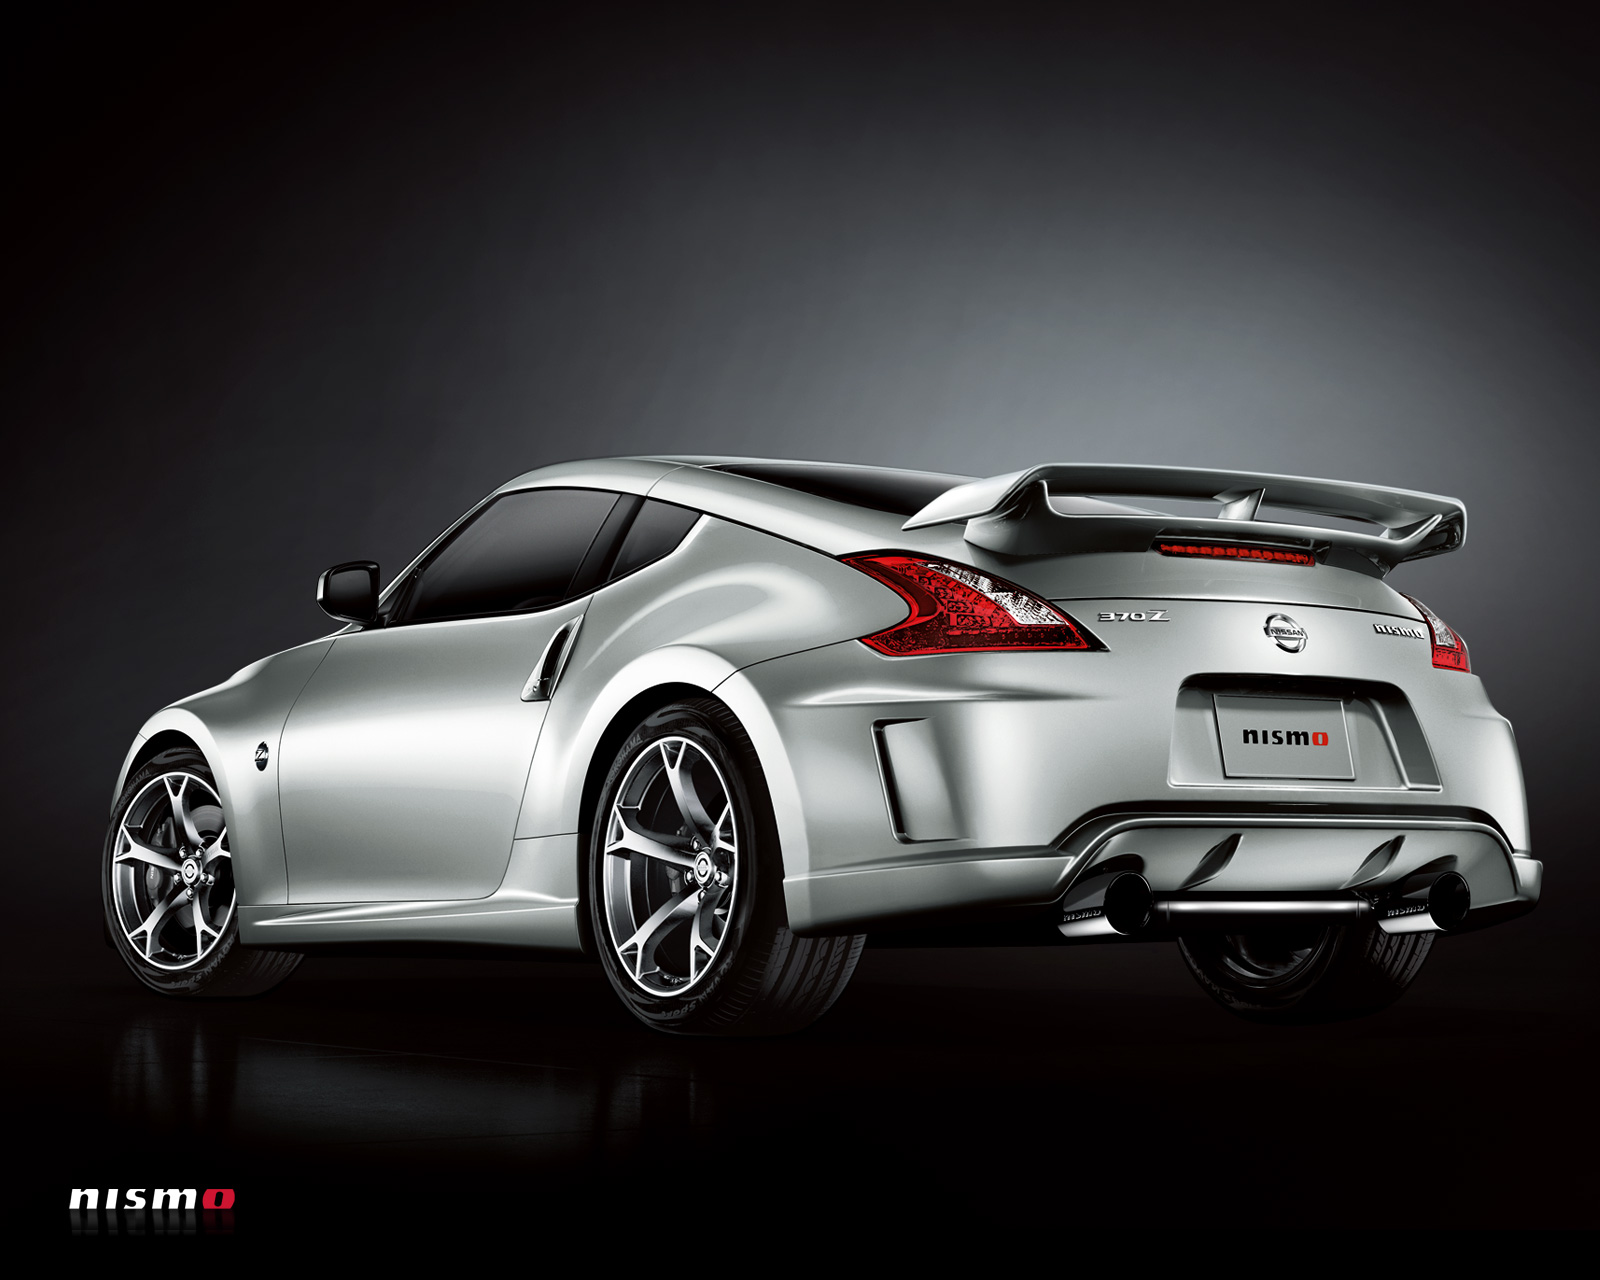 370z Nismo Wallpaper Sized Too